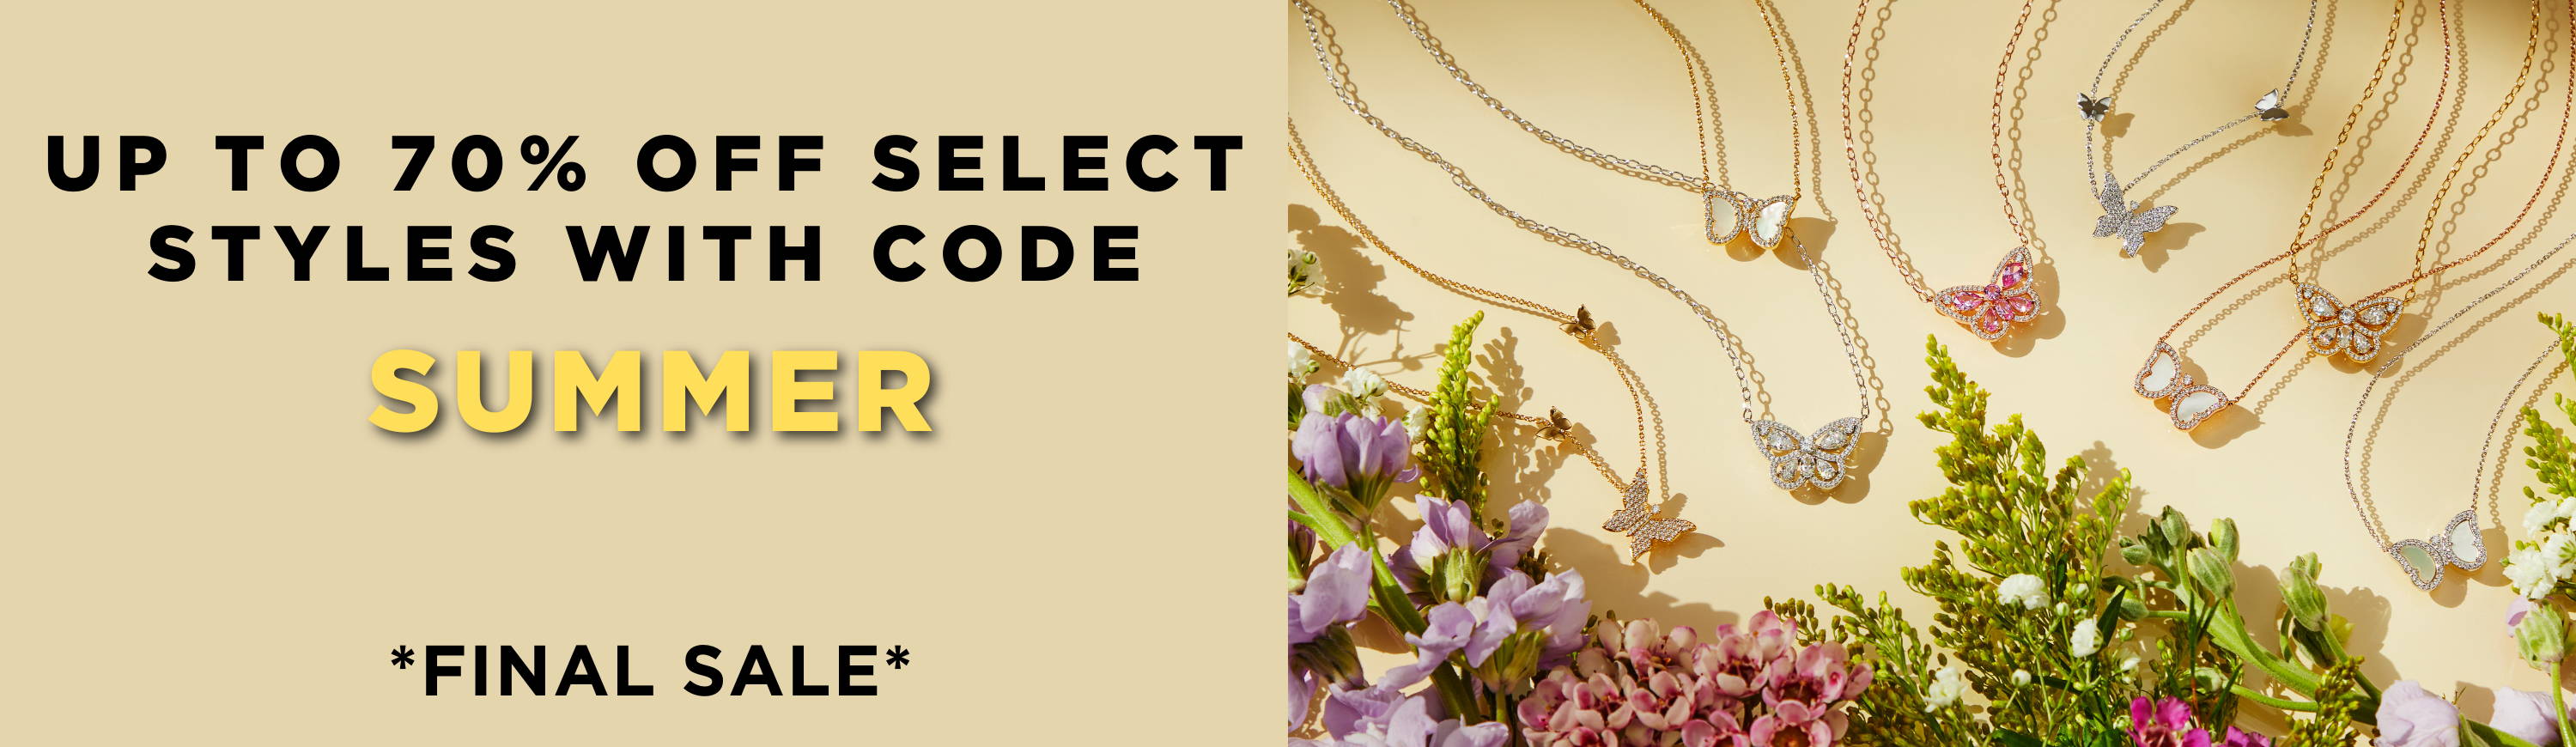 UP TO 70% OFF SELECT STYLES WITH CODE SUMMER - FINAL SALE (IMAGE DESCRIPTION - SEVERAL BUTTERFLY CZ AND COLOR STONE PENDANTS SURROUNDED BY FLOWERS)